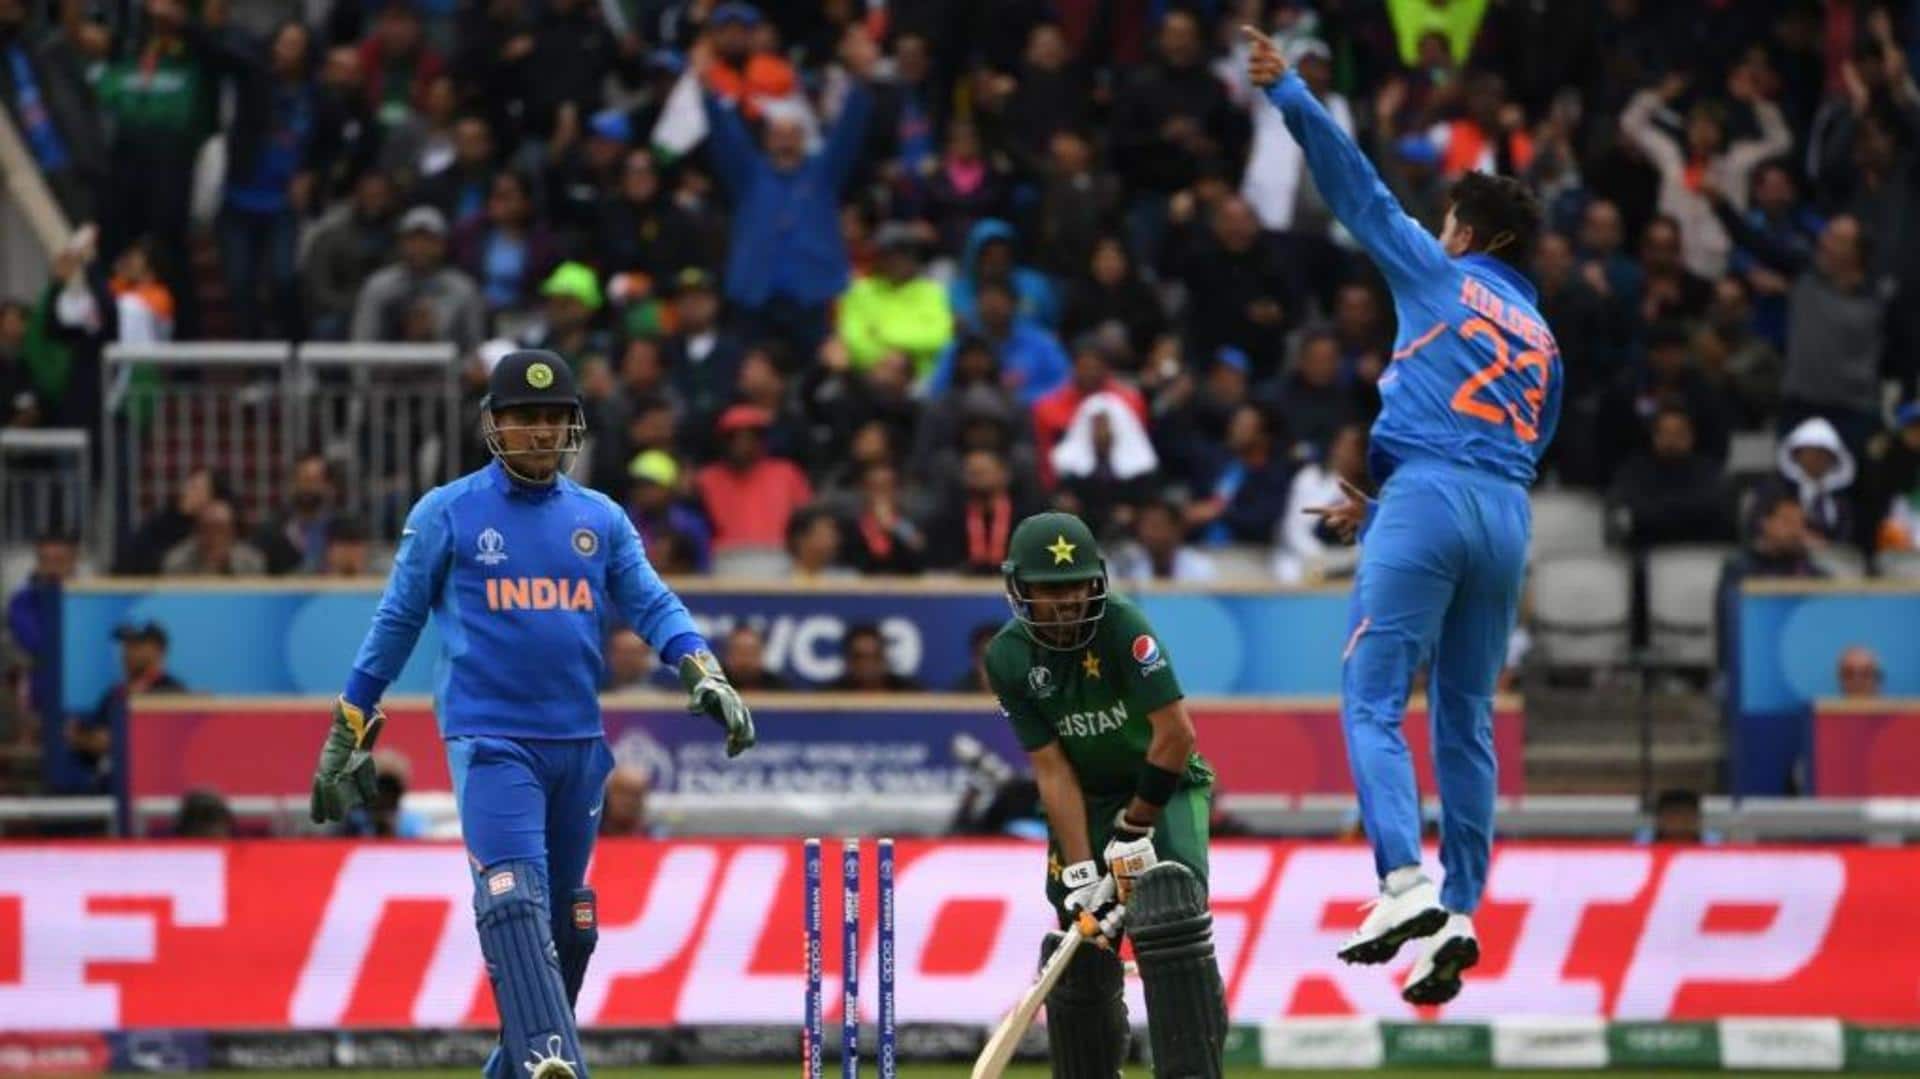 India vs Pakistan, Asia Cup: Decoding the key player battles